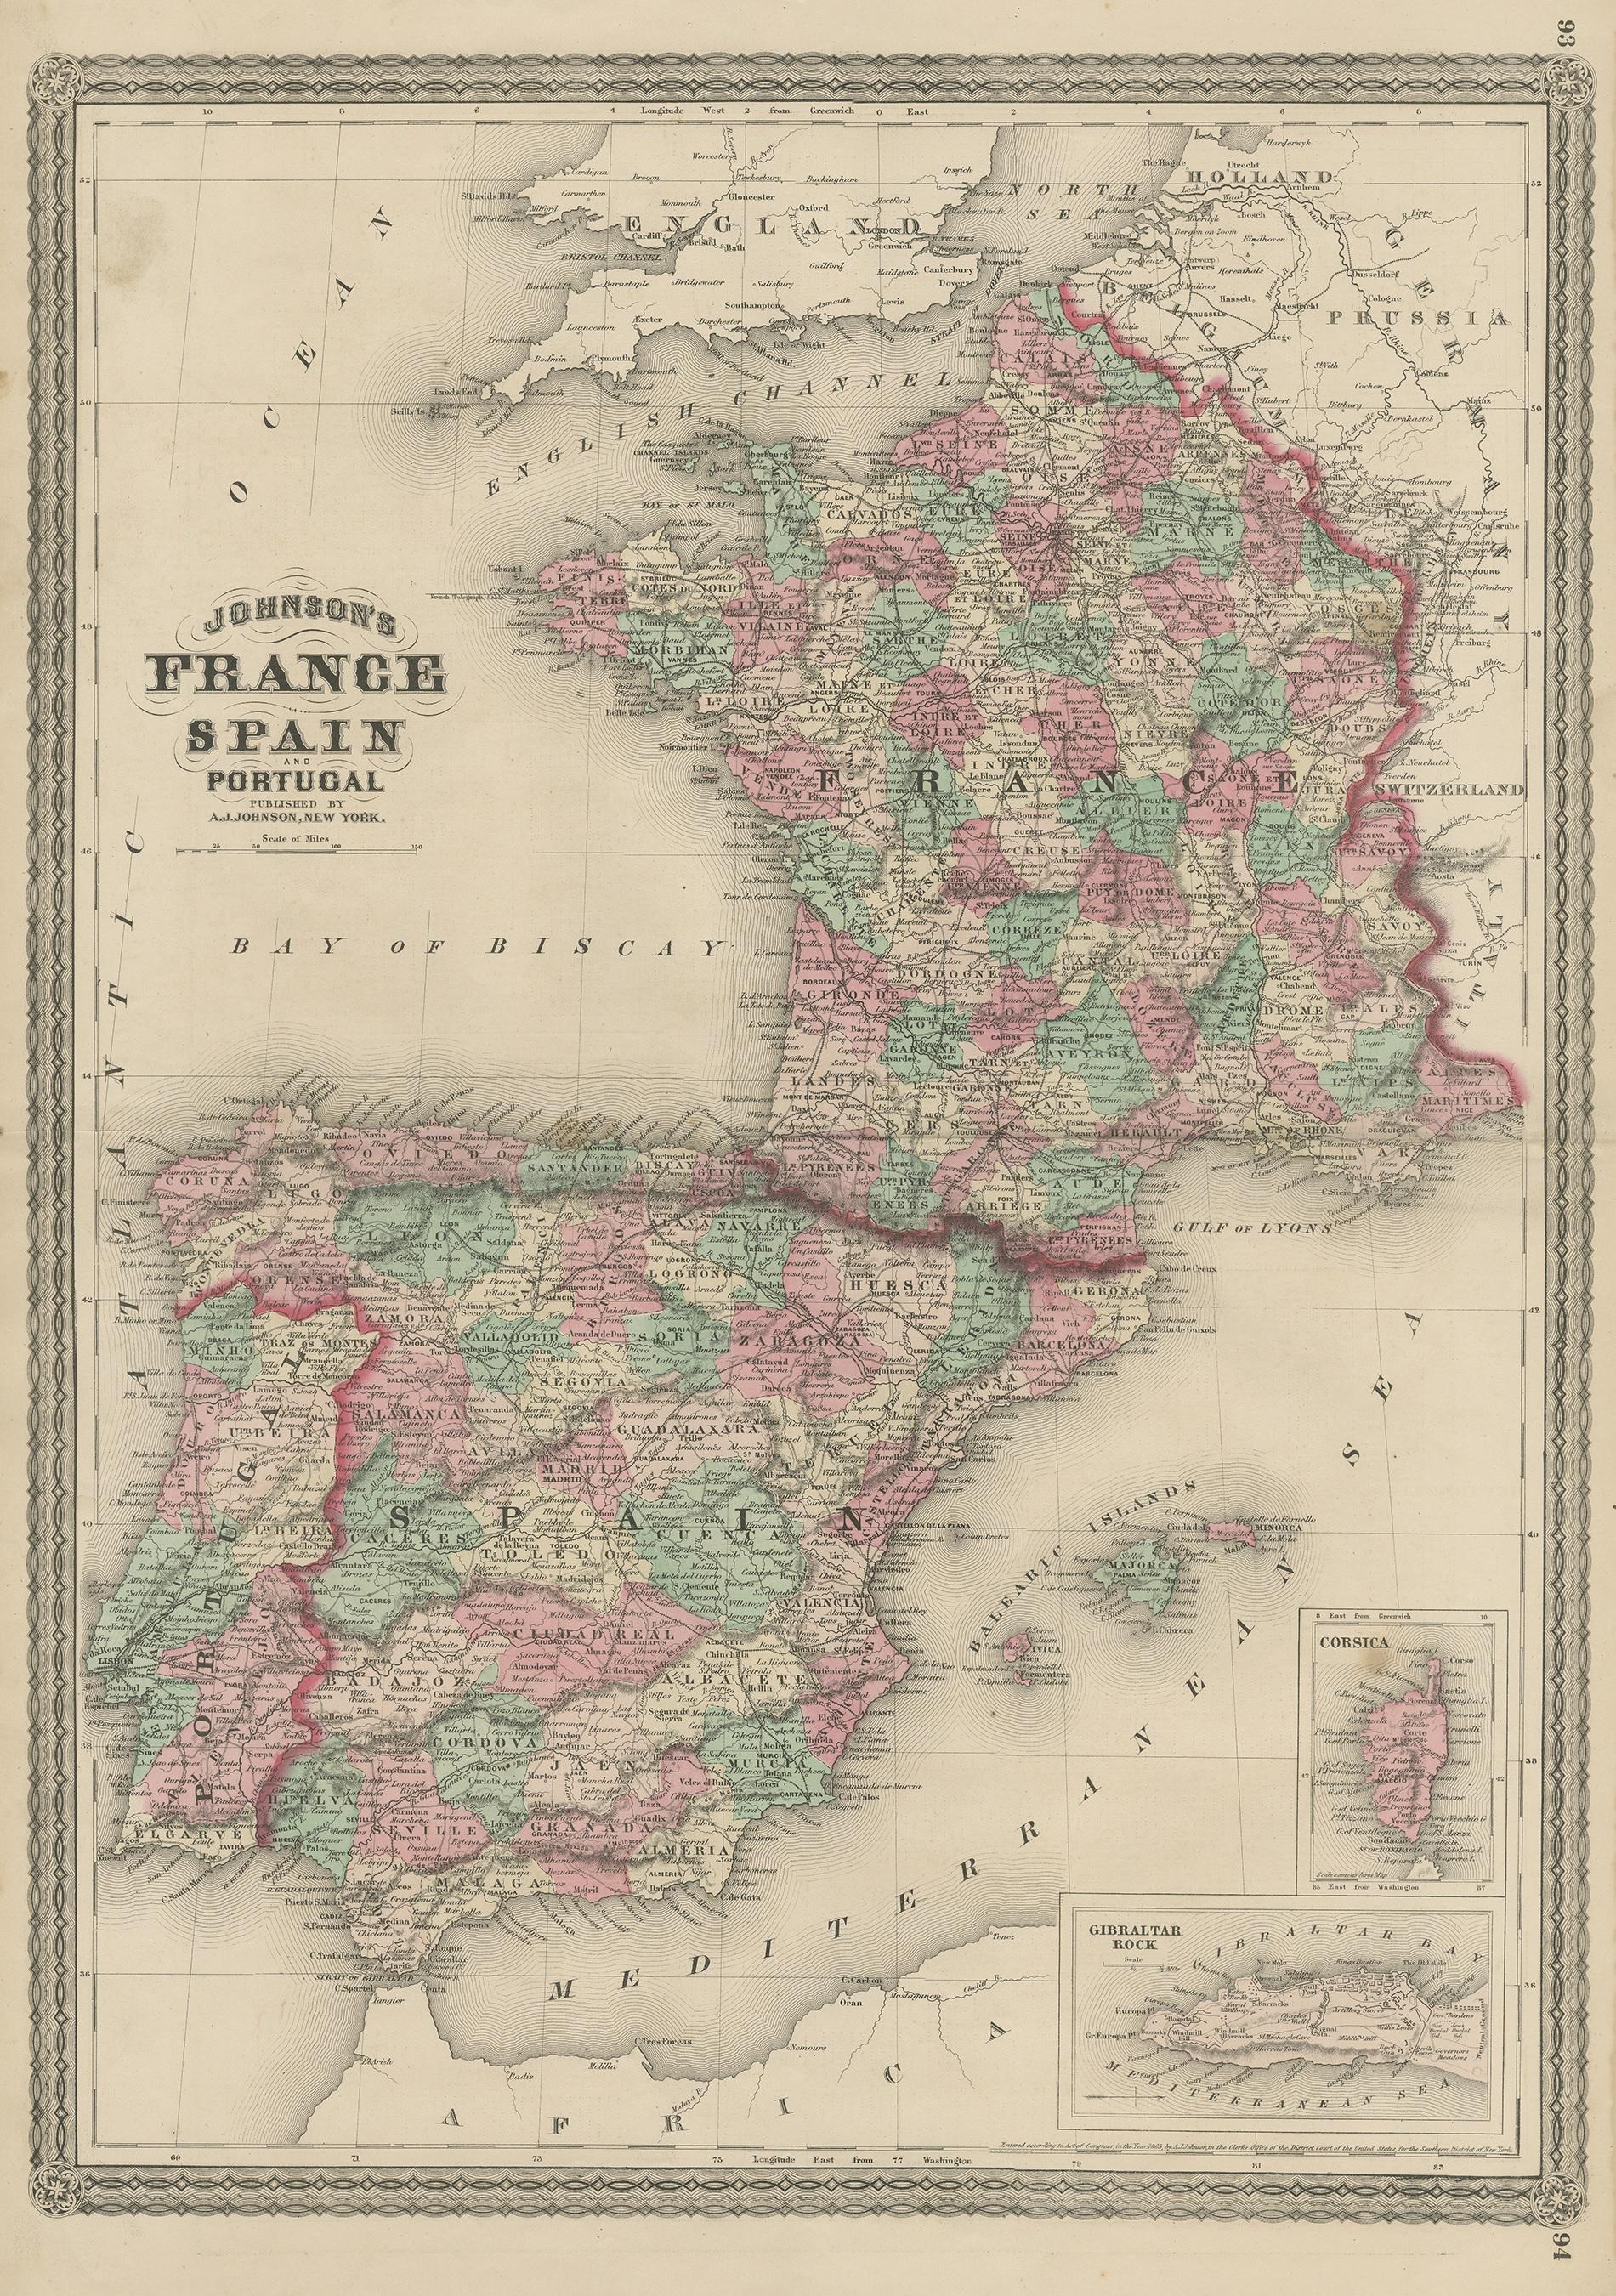 Antique map titled 'Johnson's France (..)'. Original map showing France, Spain and Portugal. With inset maps of Corsica and Gibraltar Rock. This map originates from 'Johnson's New Illustrated Family Atlas of the World' by A.J. Johnson. Published